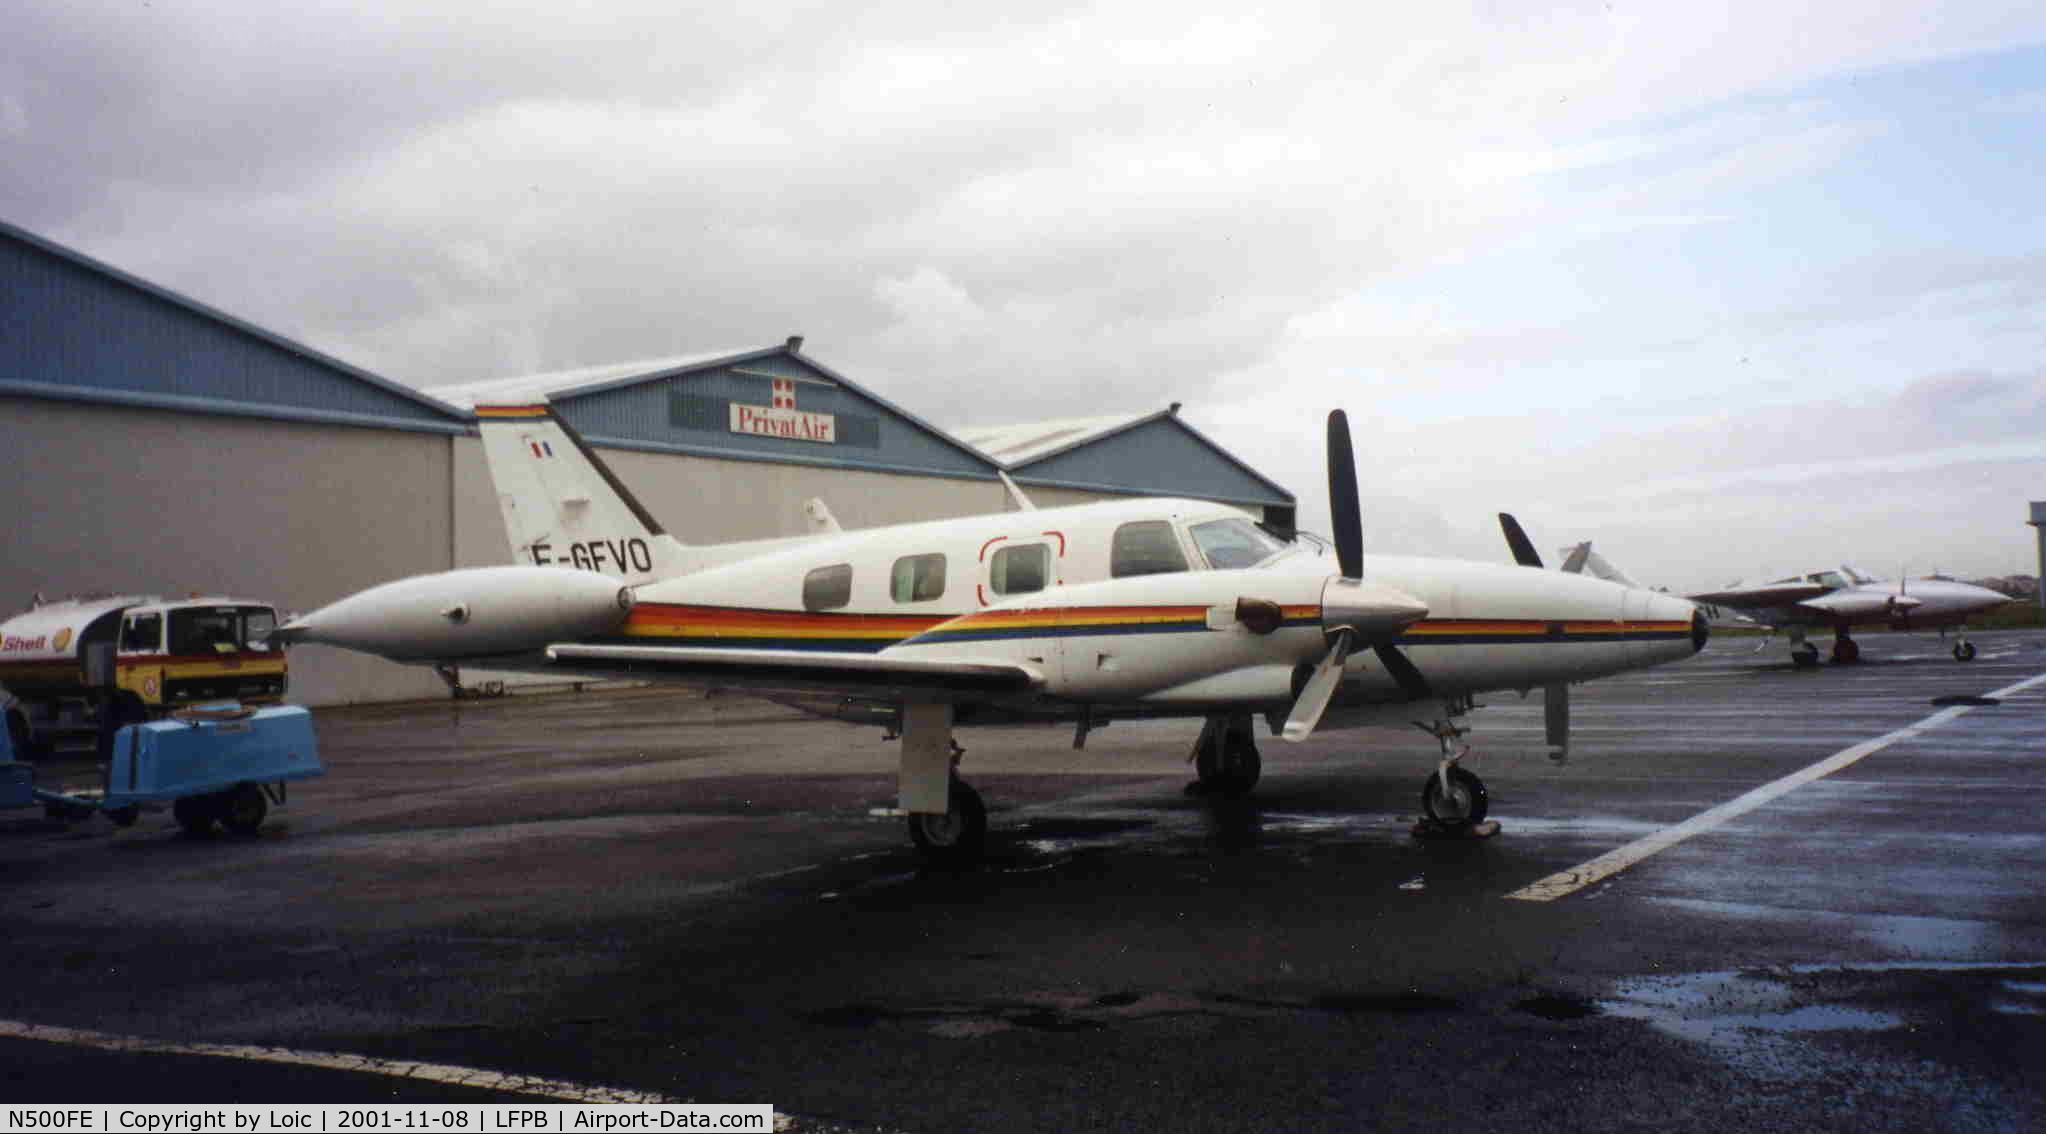 N500FE, Piper PA-31T Turbo Cheyenne C/N 31T-7920049, Last picture in France. F-GFVO to Stavanger